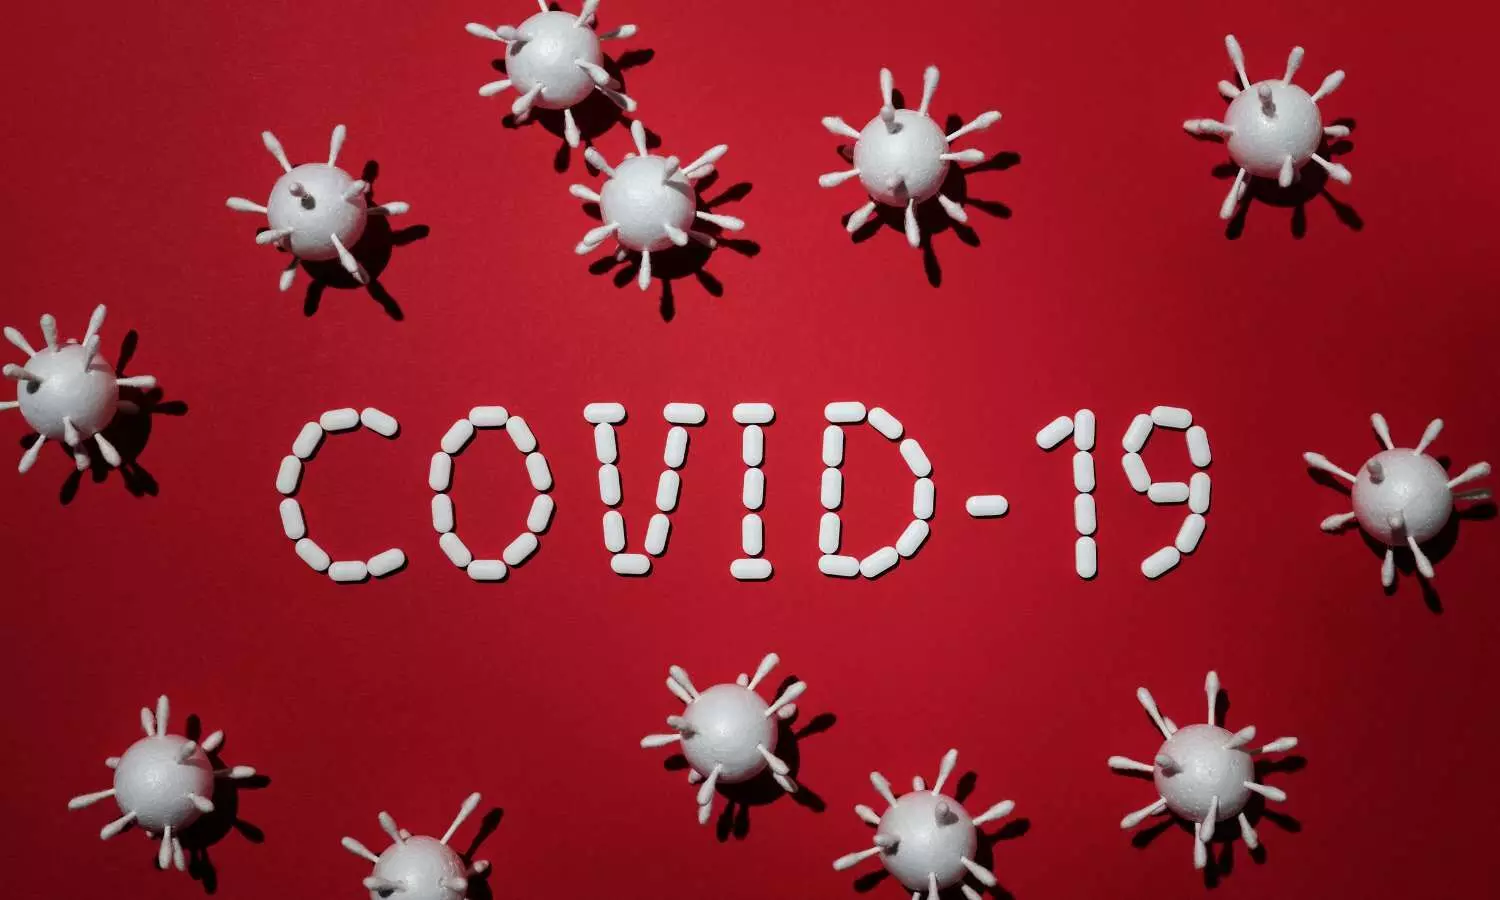 Molnupiravir may not lower hospitalization or mortality but hastens recovery in vaccinated COVID-19 patients: Lancet